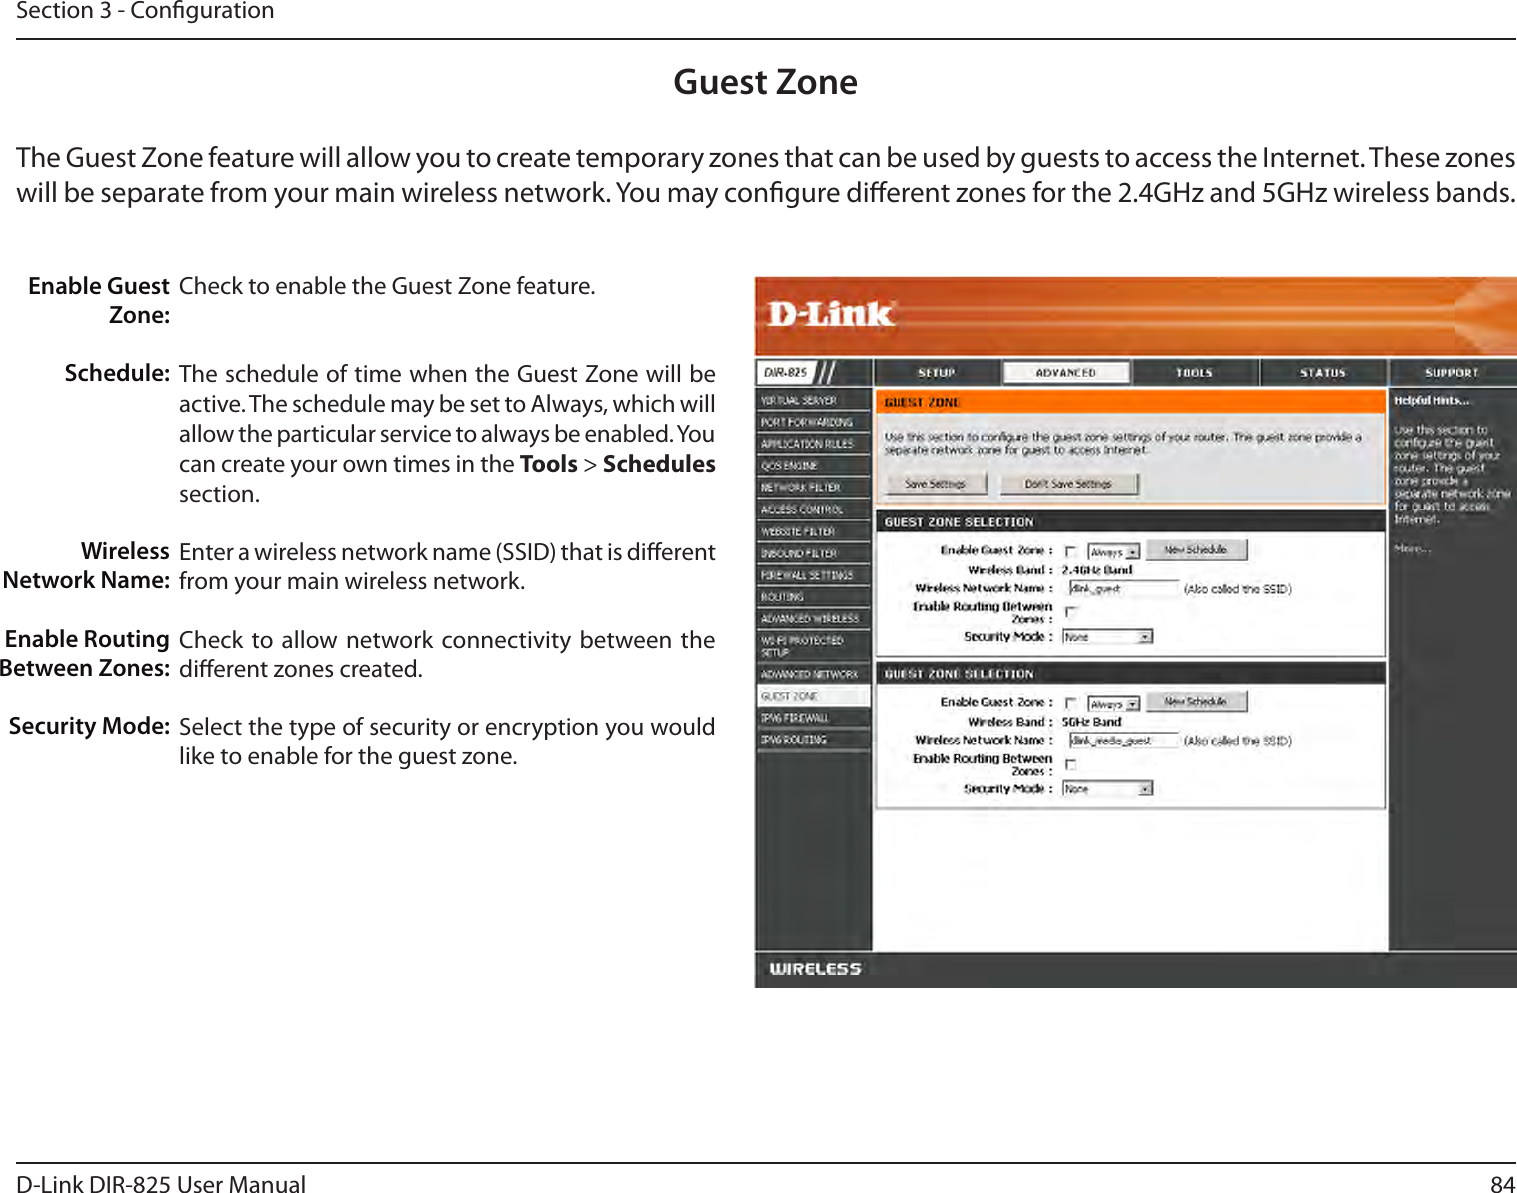 84D-Link DIR-825 User ManualSection 3 - CongurationGuest ZoneCheck to enable the Guest Zone feature. The schedule of time when the Guest Zone will be active. The schedule may be set to Always, which will allow the particular service to always be enabled. You can create your own times in the Tools &gt; Schedules section.Enter a wireless network name (SSID) that is dierent from your main wireless network.Check to allow network connectivity  between the dierent zones created. Select the type of security or encryption you would like to enable for the guest zone.  Enable Guest Zone:Schedule:Wireless Network Name:Enable Routing Between Zones:Security Mode:The Guest Zone feature will allow you to create temporary zones that can be used by guests to access the Internet. These zones will be separate from your main wireless network. You may congure dierent zones for the 2.4GHz and 5GHz wireless bands.